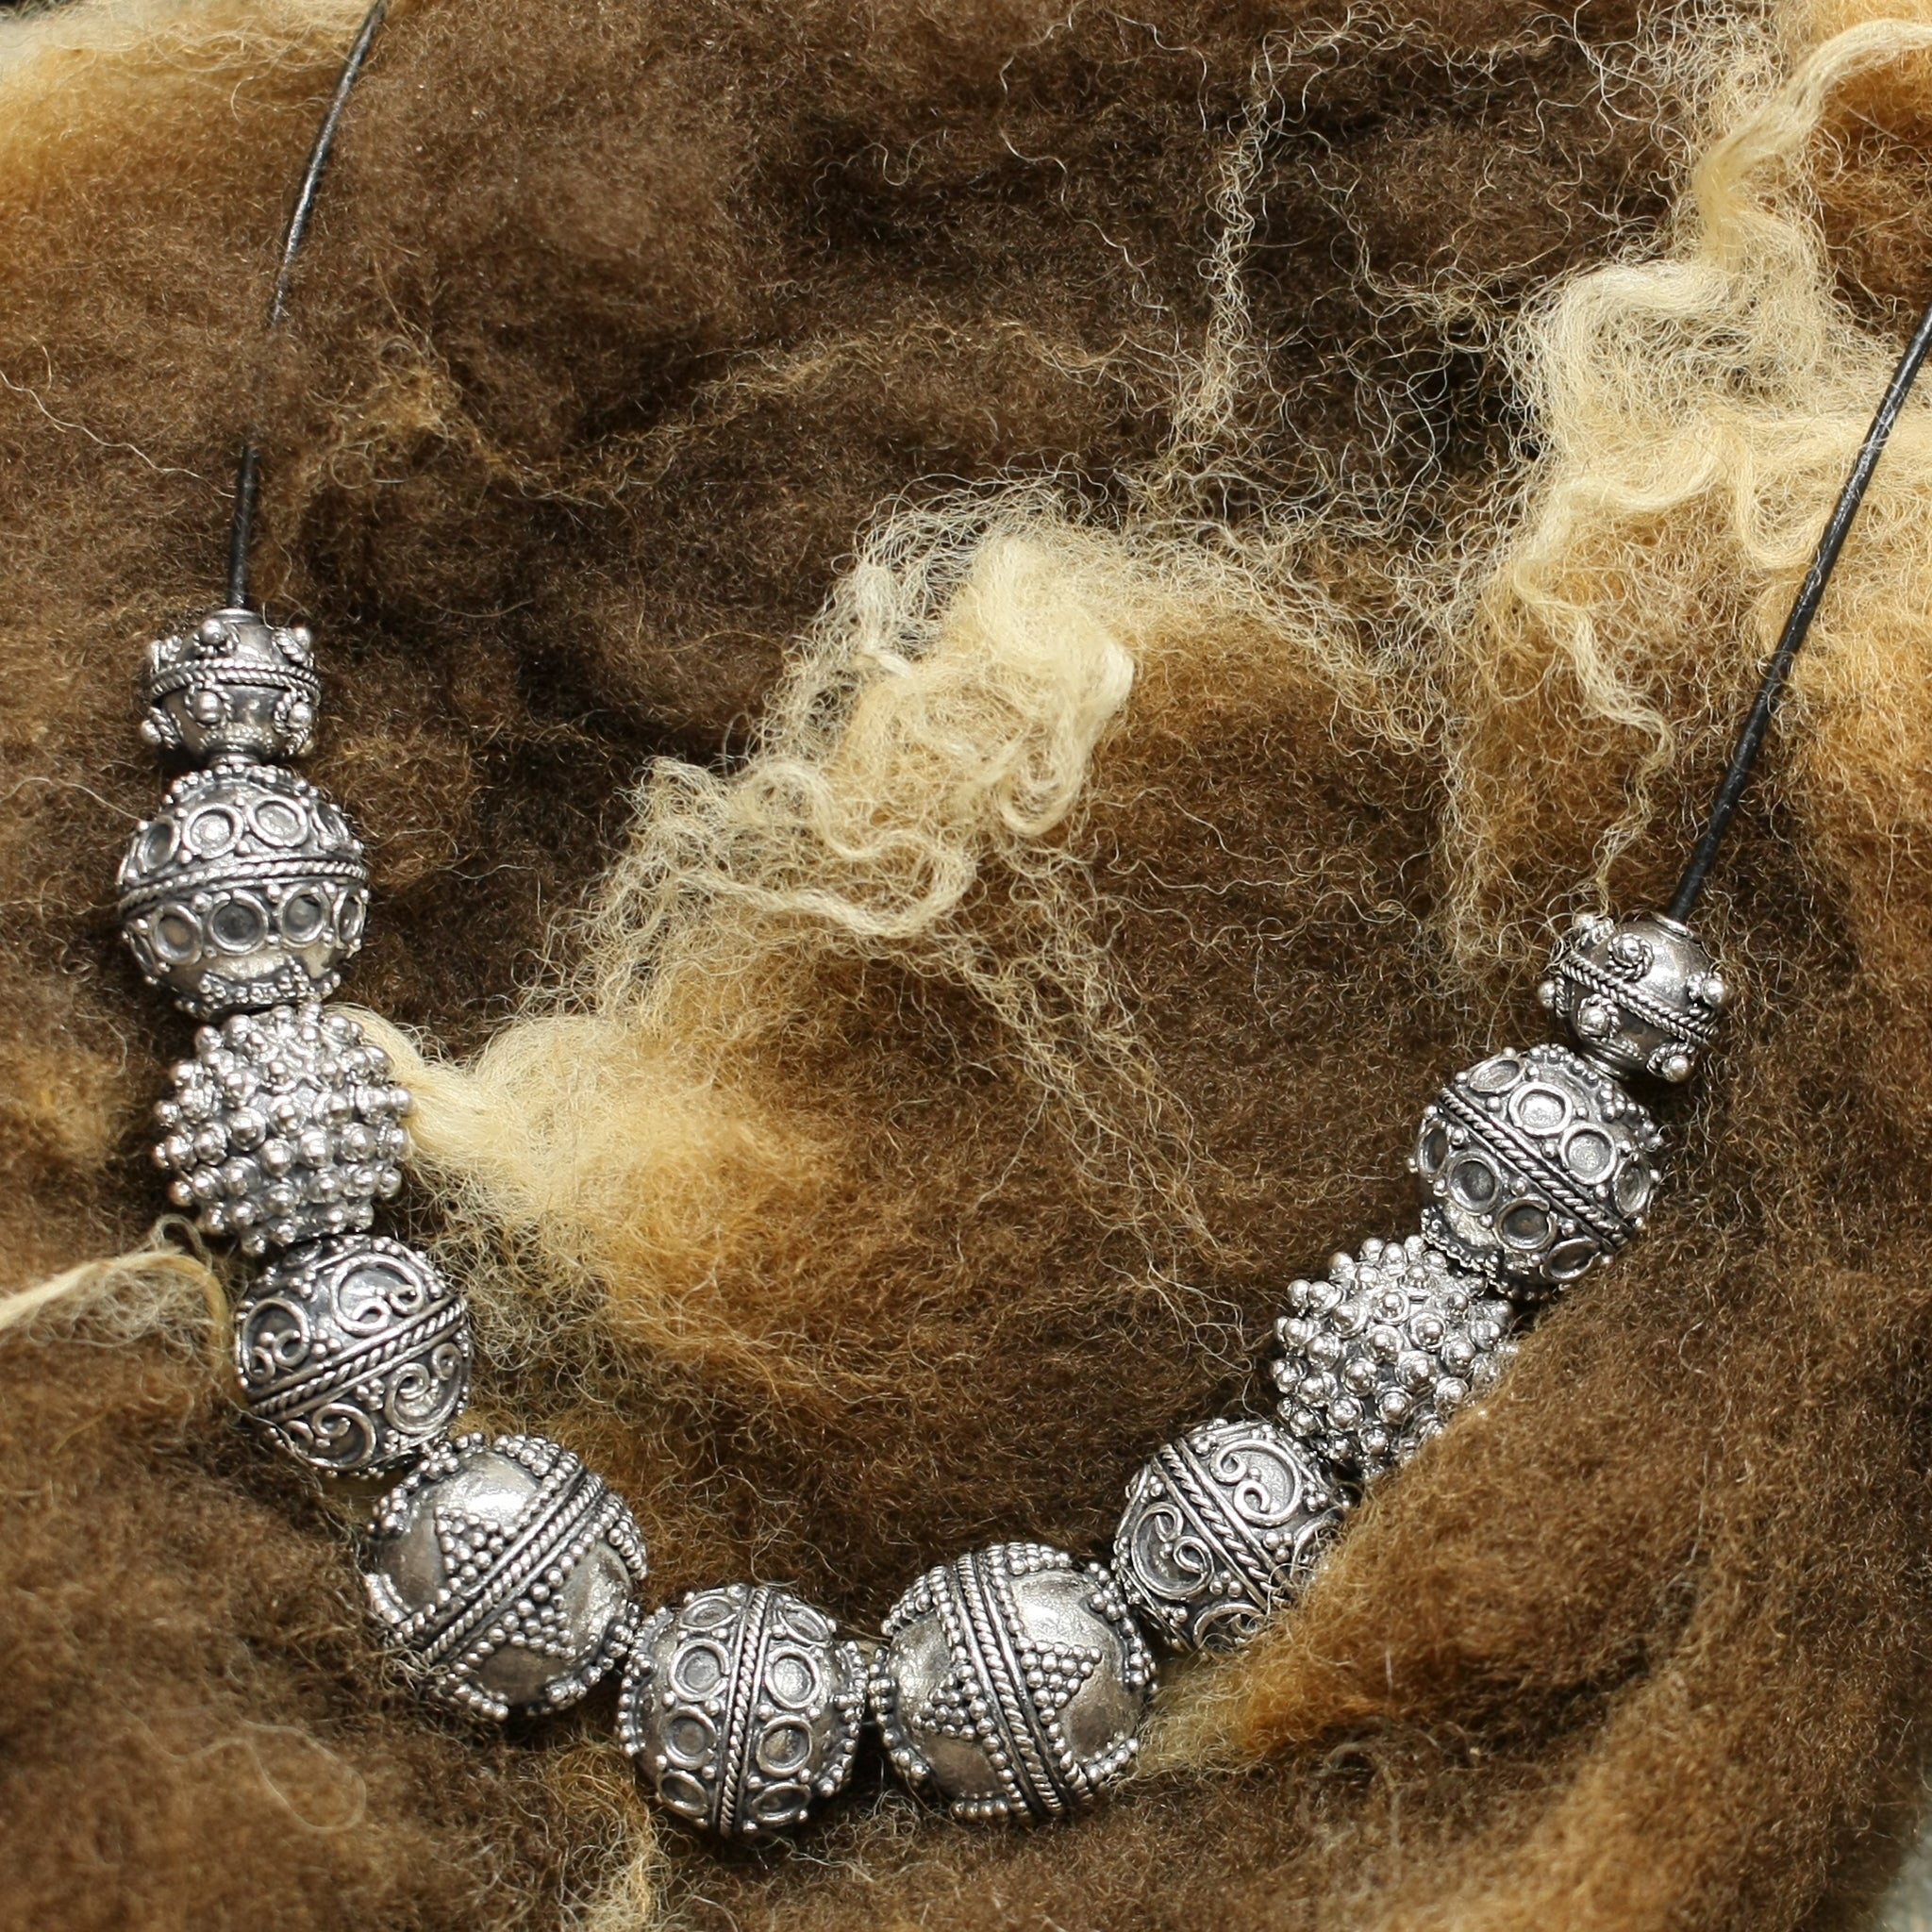 Silver Viking Beads from Visby on Leather Thong on Wool Fleece